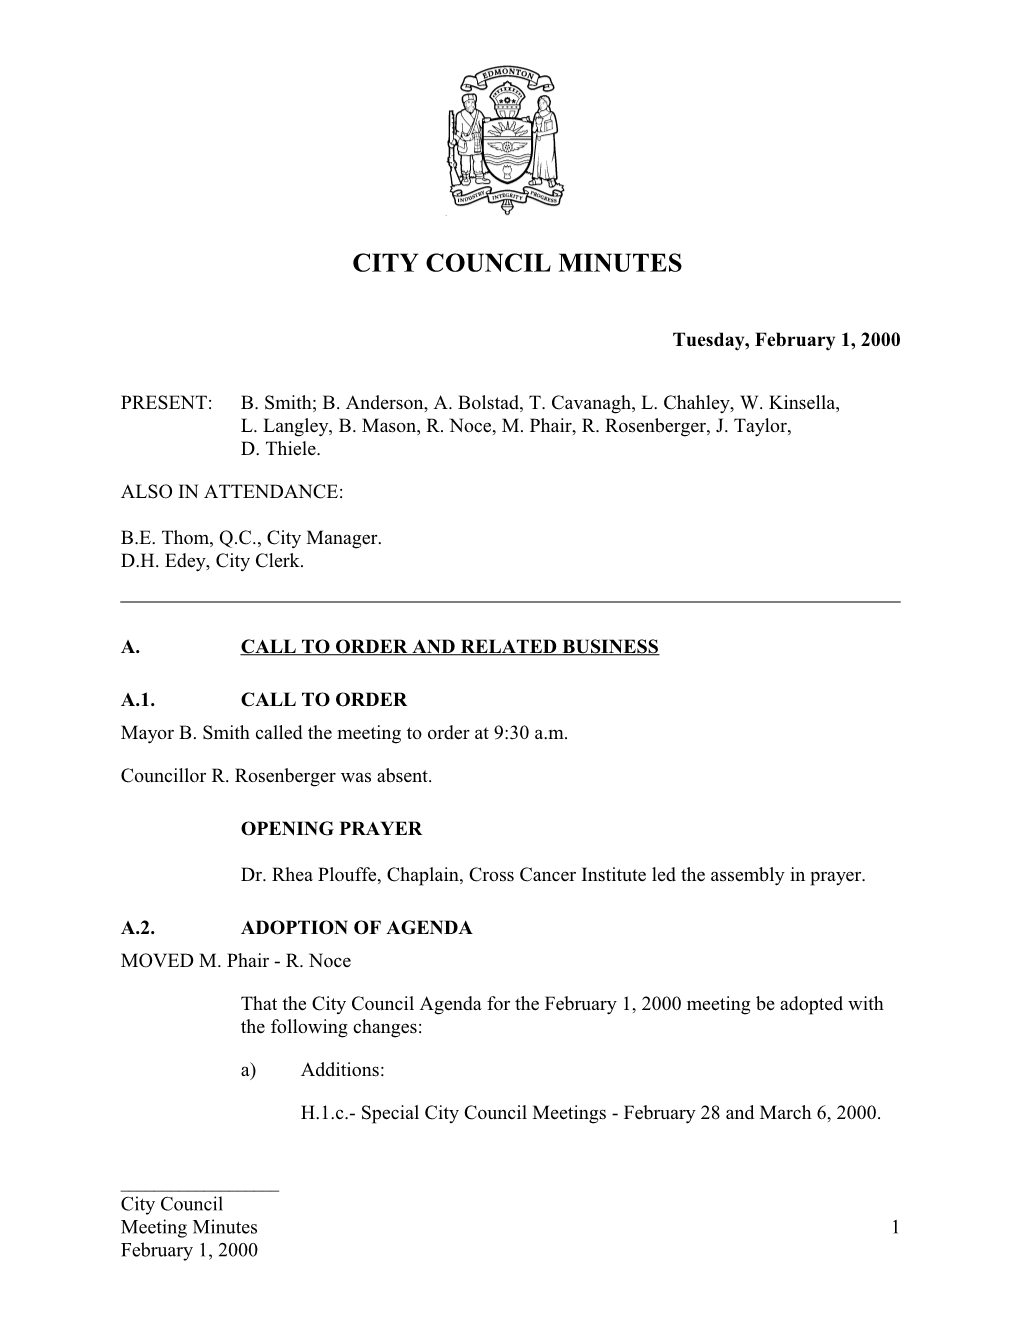 Minutes for City Council February 1, 2000 Meeting